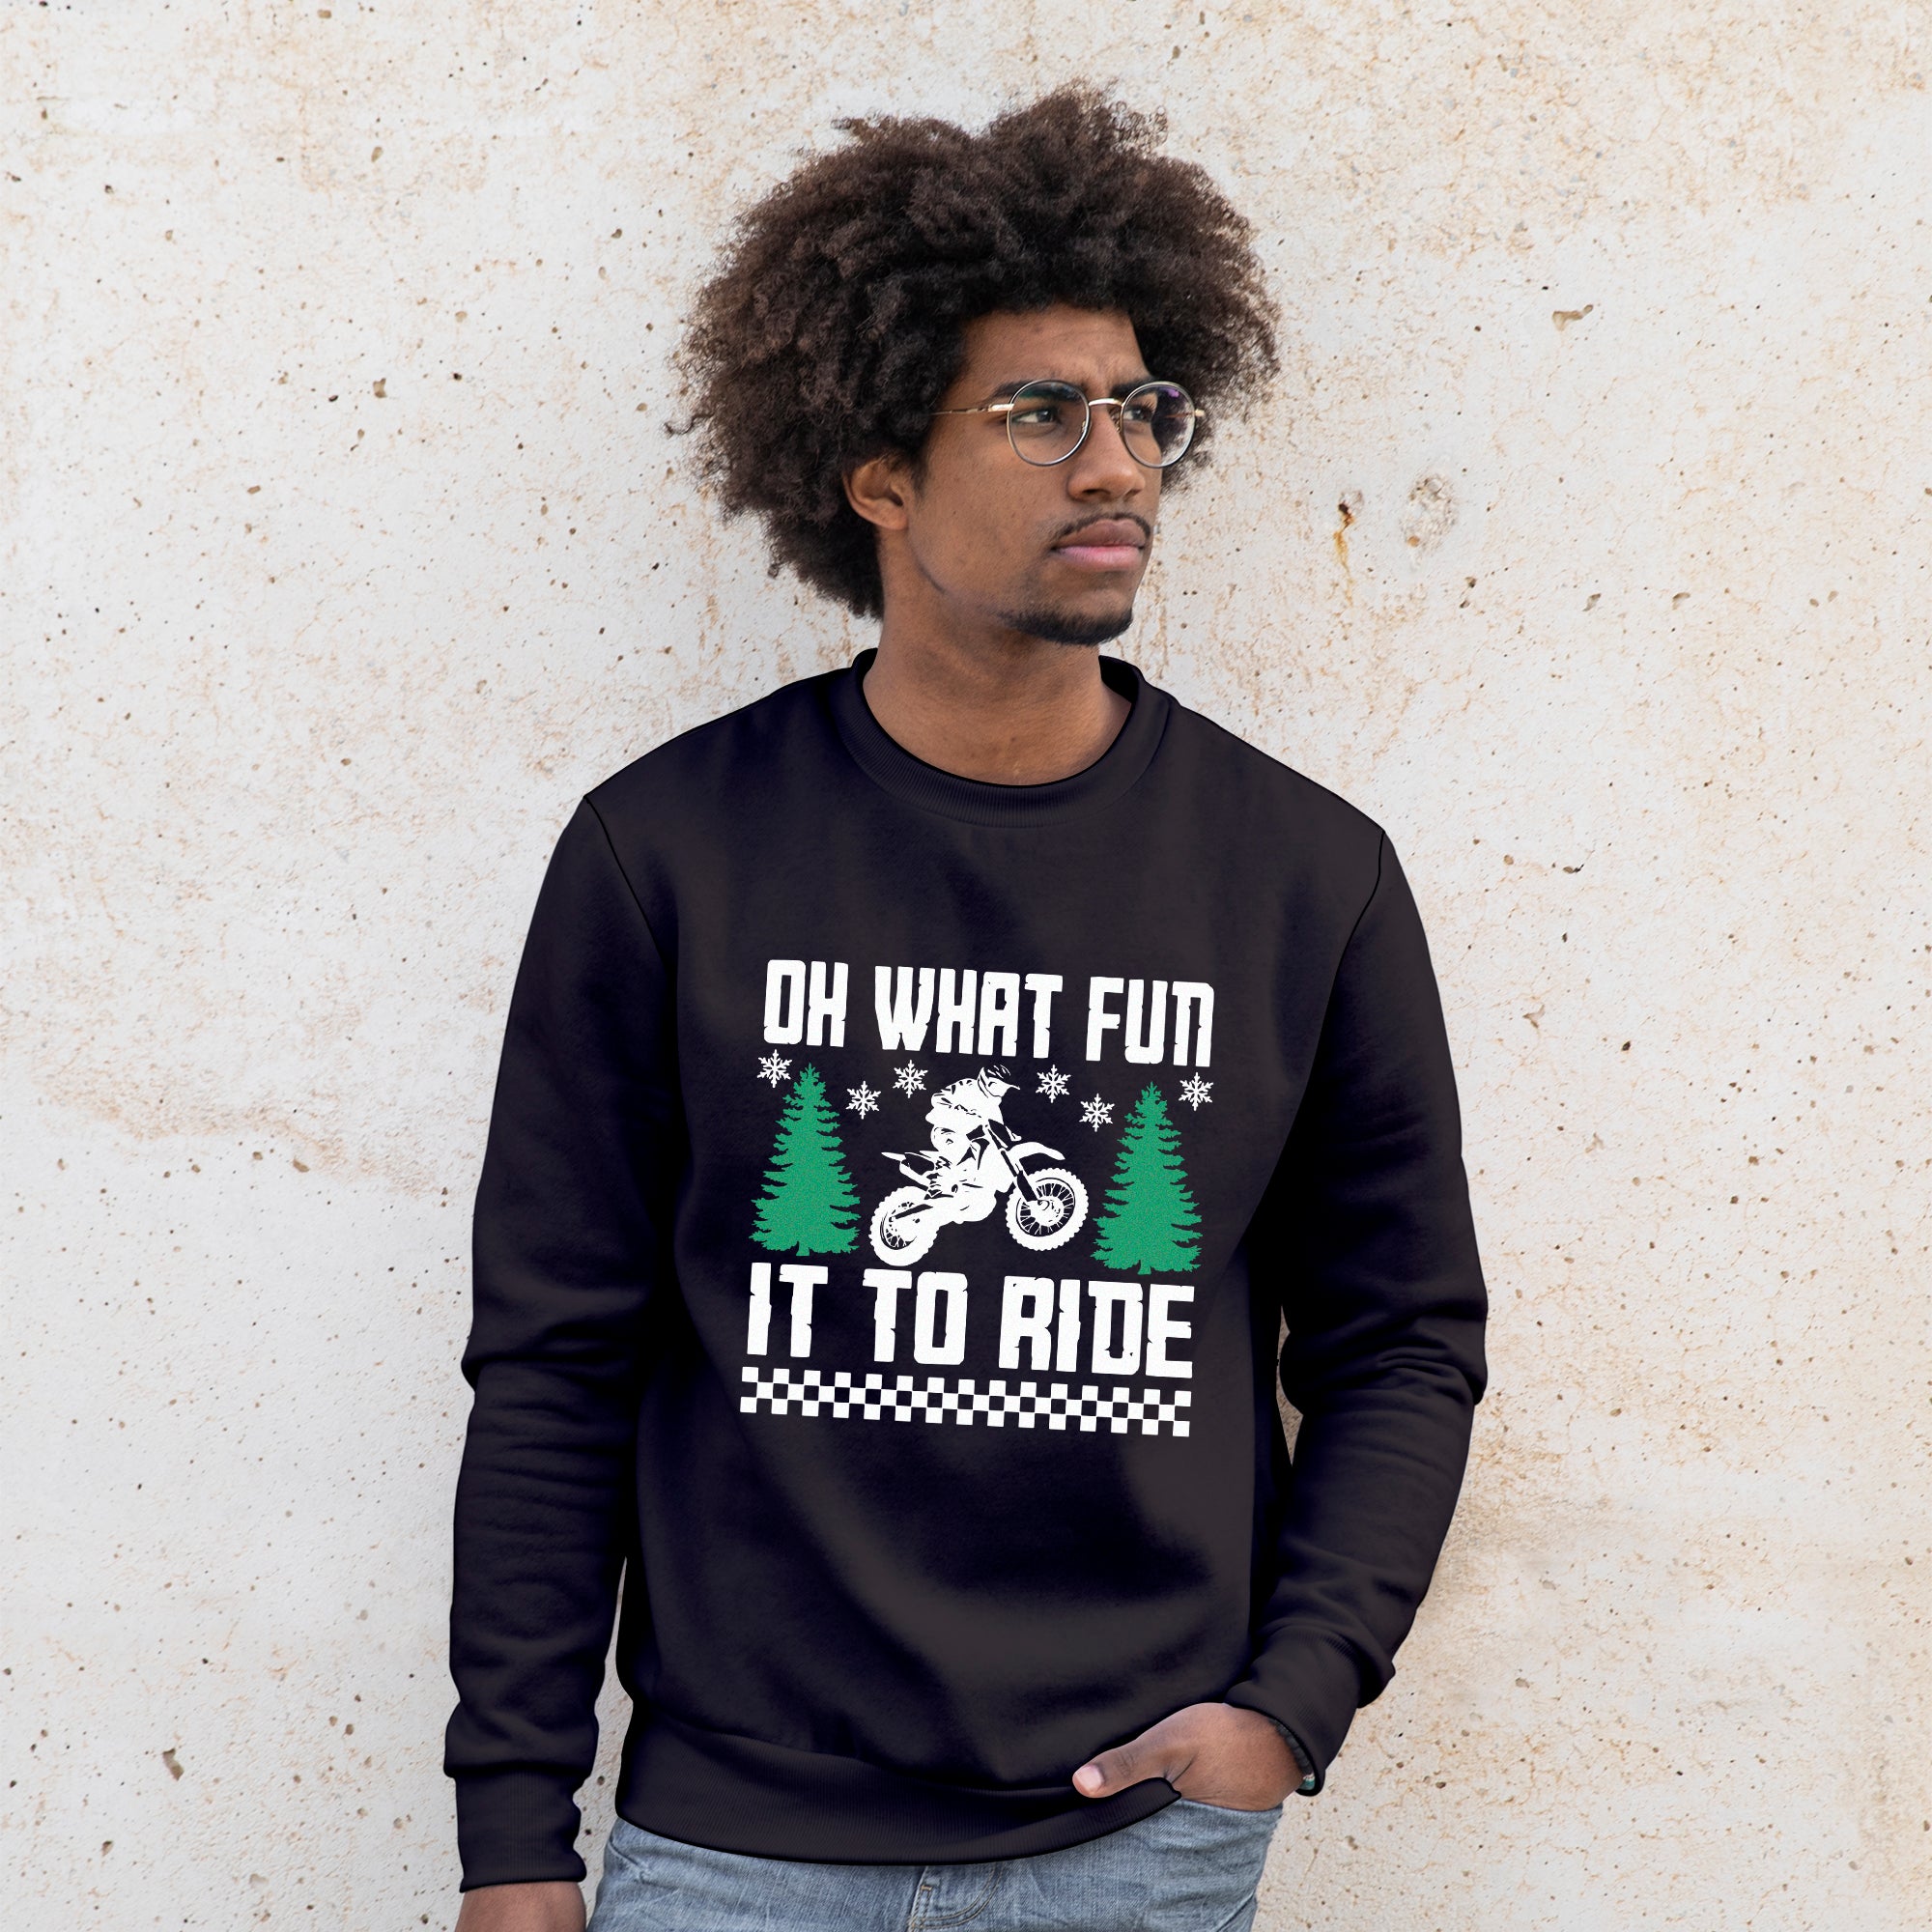 'Oh What fun it is to Ride' Sweatshirt